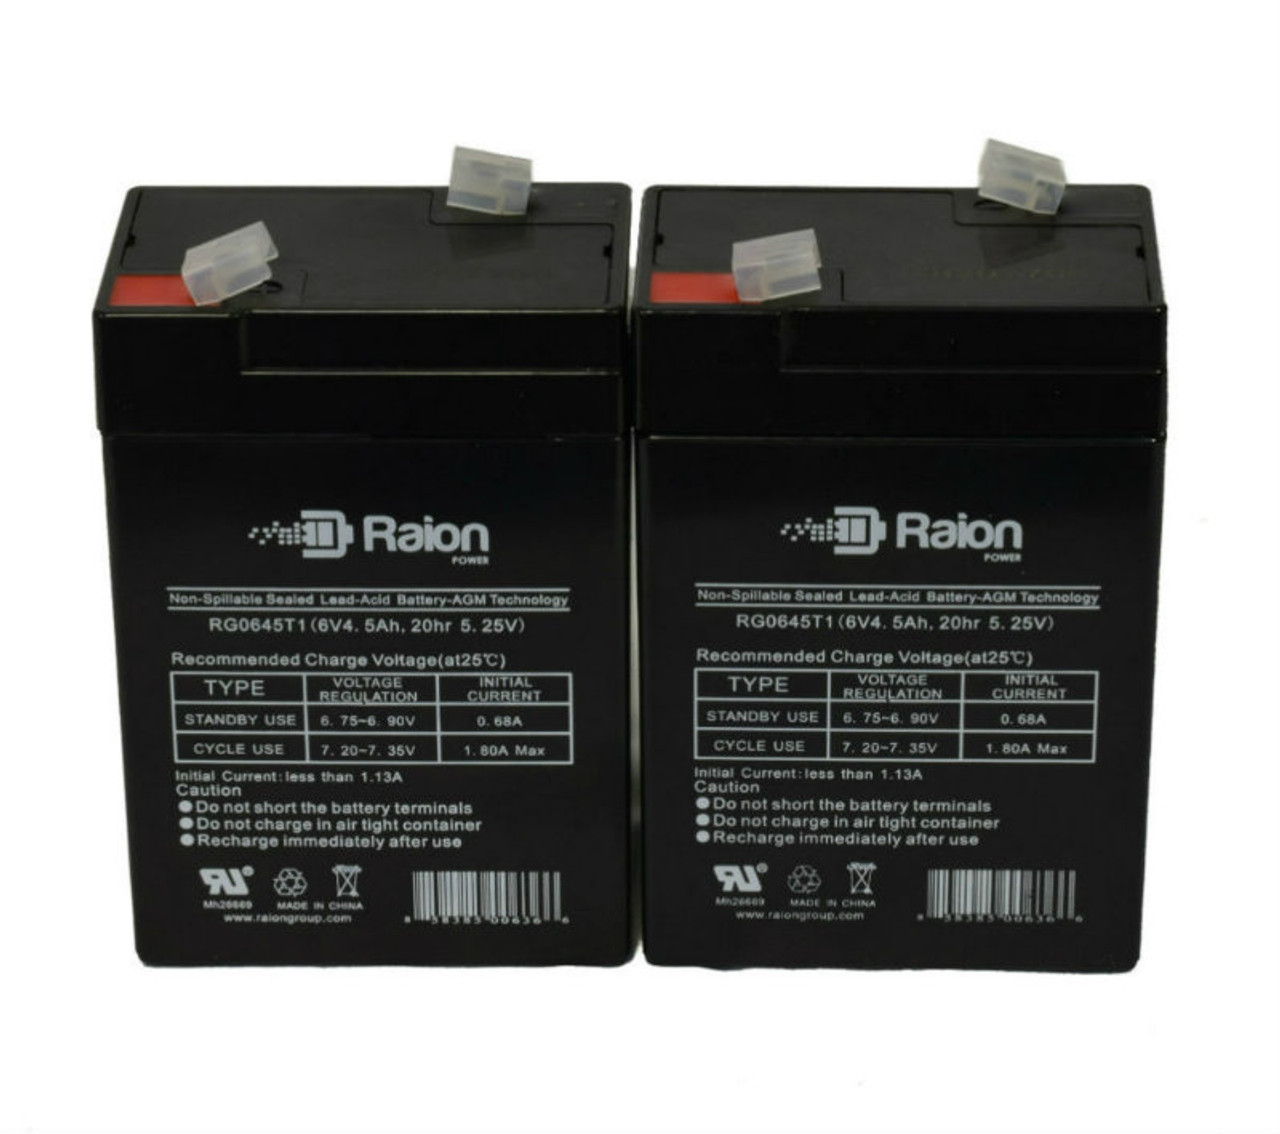 Raion Power 6V 4.5Ah Replacement Emergency Light Battery for High-Lites 39-01 - 2 Pack